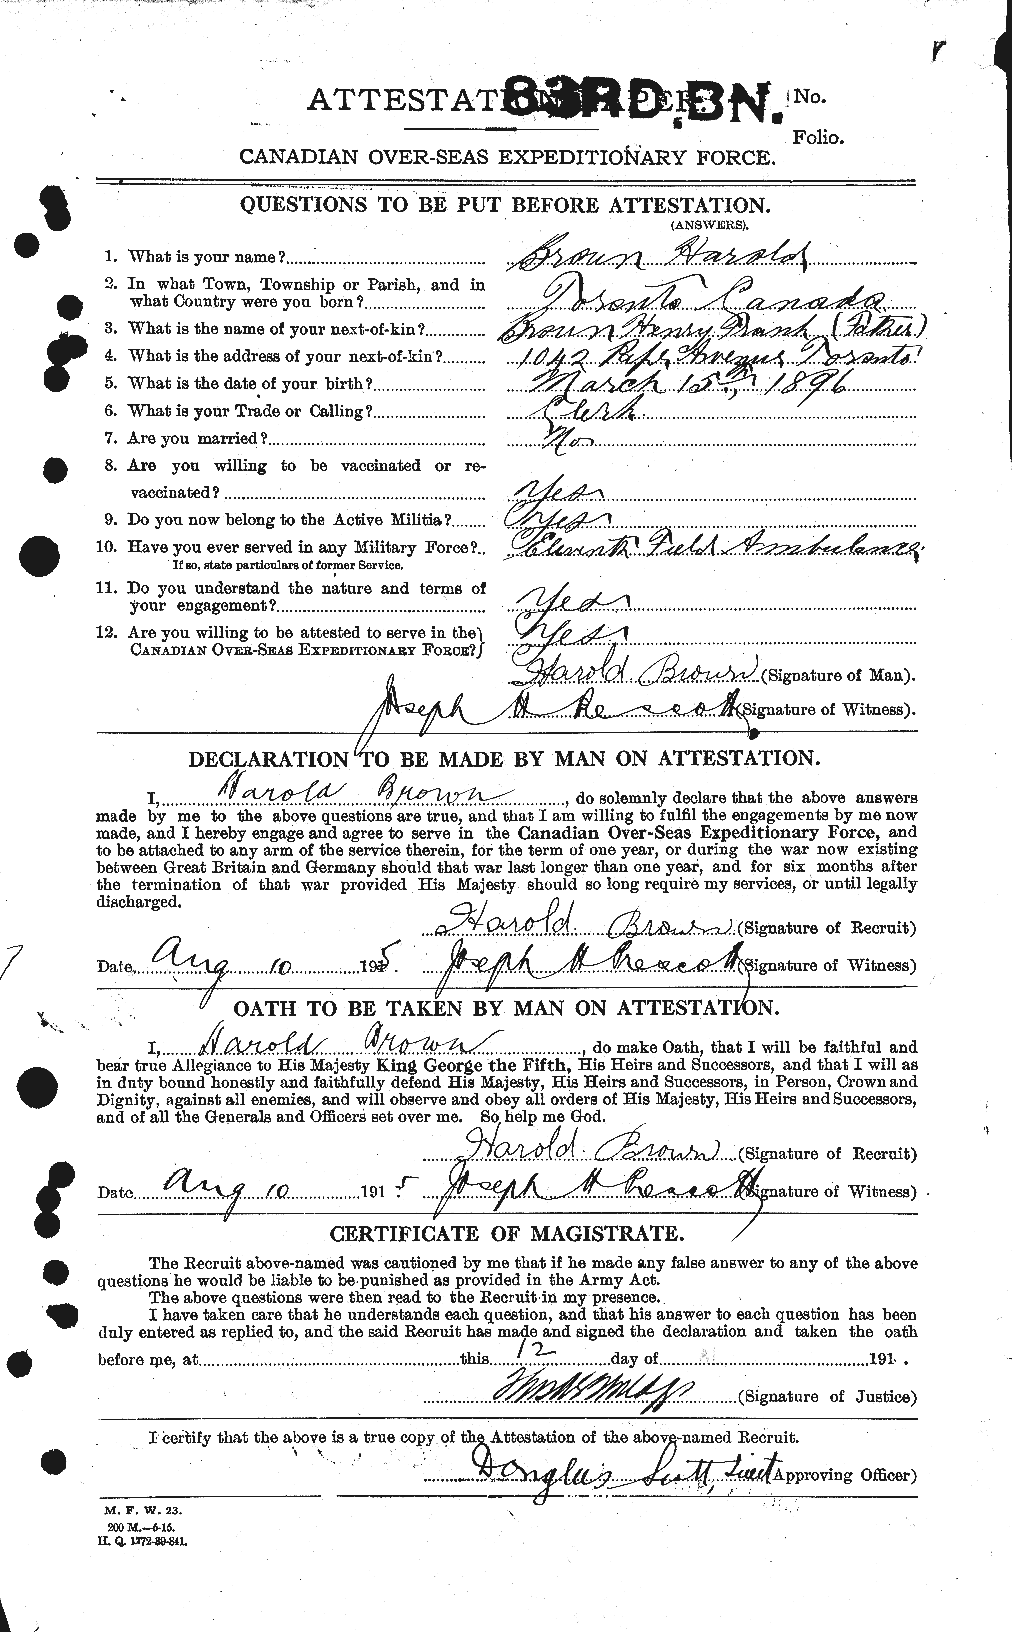 Personnel Records of the First World War - CEF 262668a